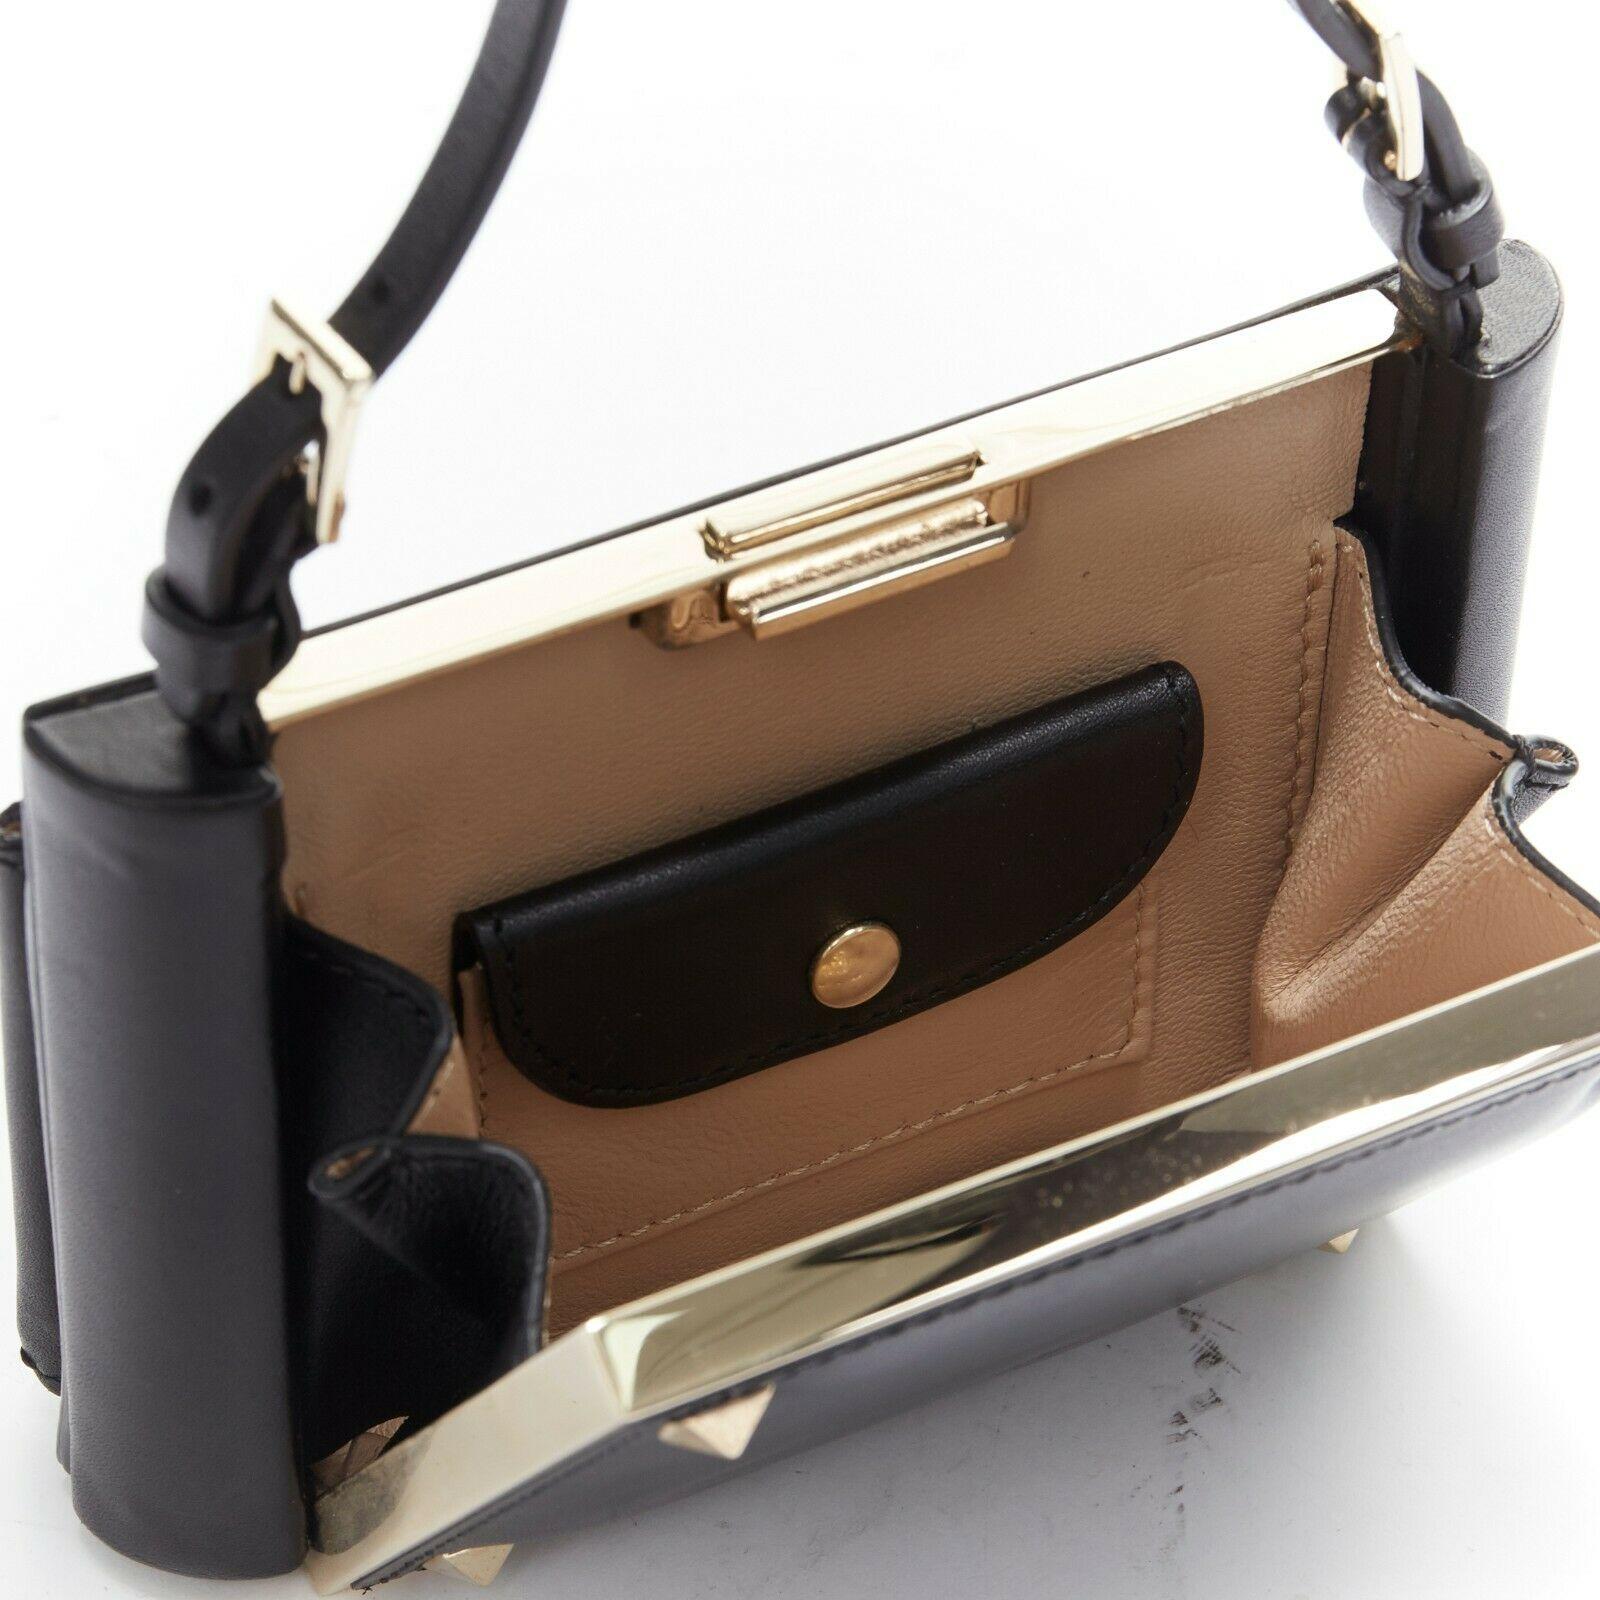 VALENTINO black leather gold Rockstud metal frame minaudiere clasp clutch bag For Sale 2